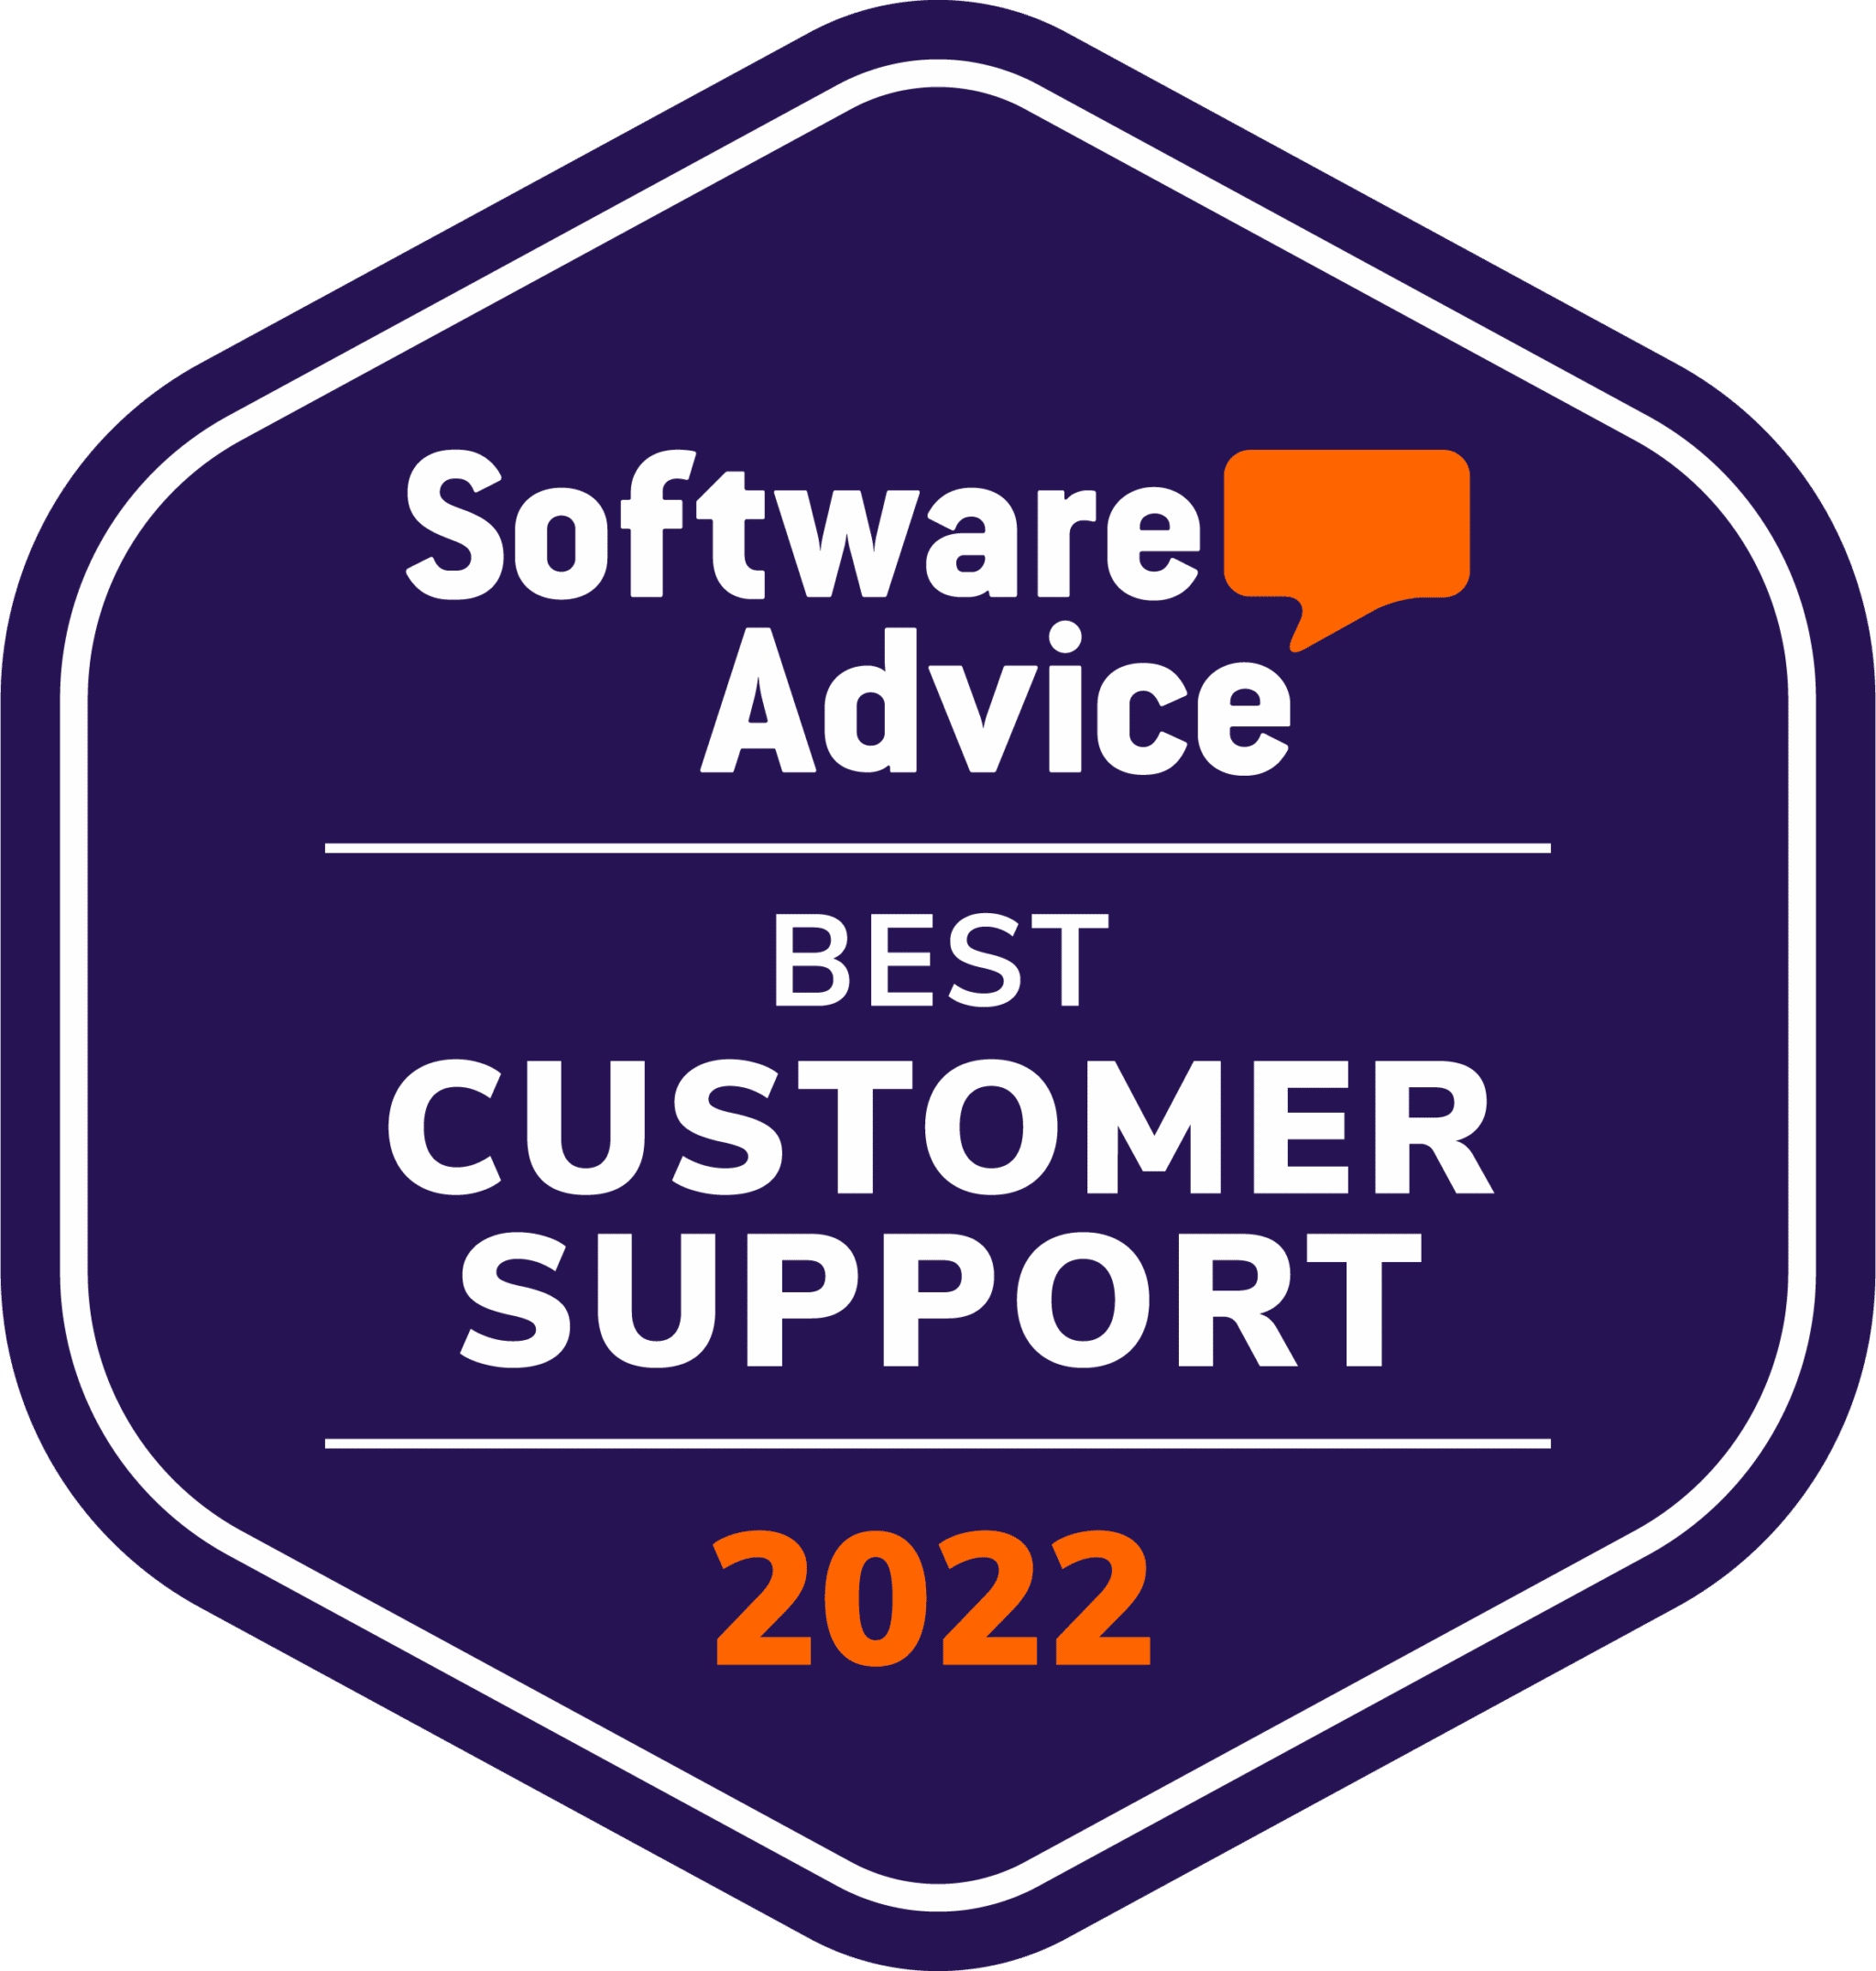 MyCase is awarded Best Customer Support by Software Advice in 2022